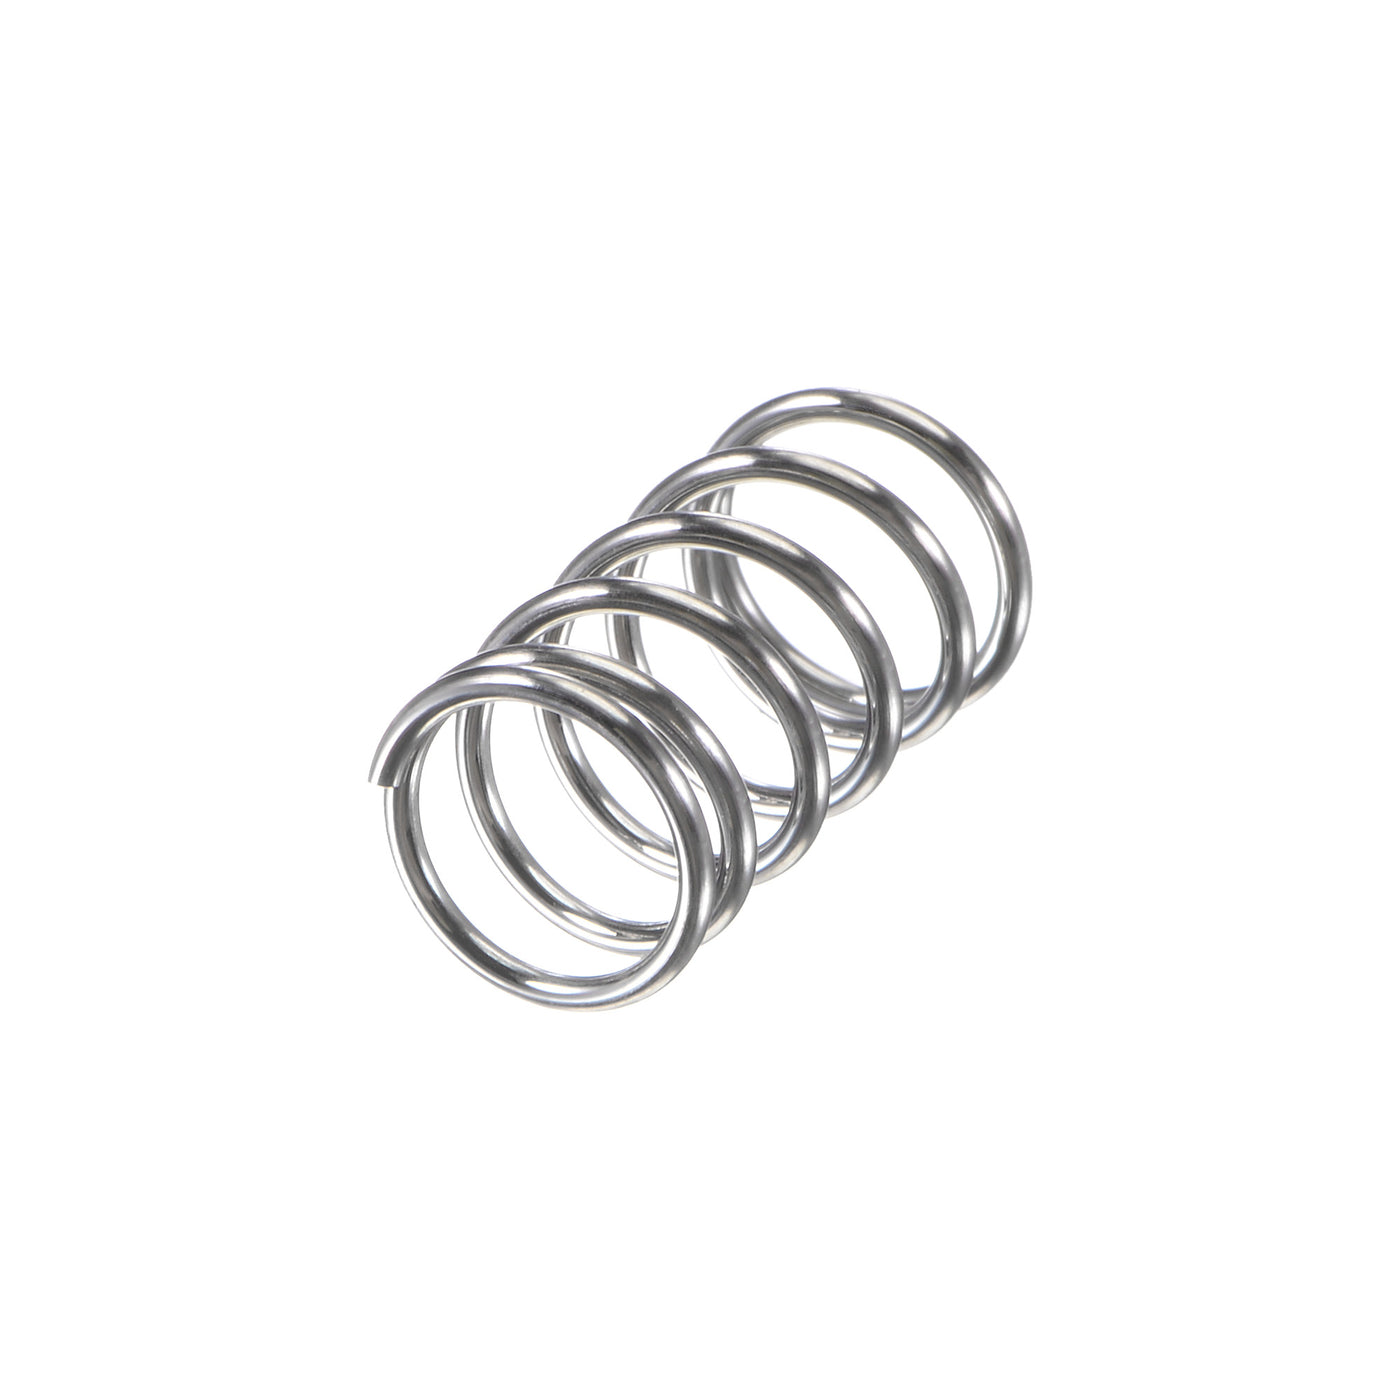 uxcell Uxcell 8mmx0.8mmx15mm 304 Stainless Steel Compression Spring 11.8N Load Capacity 10pcs